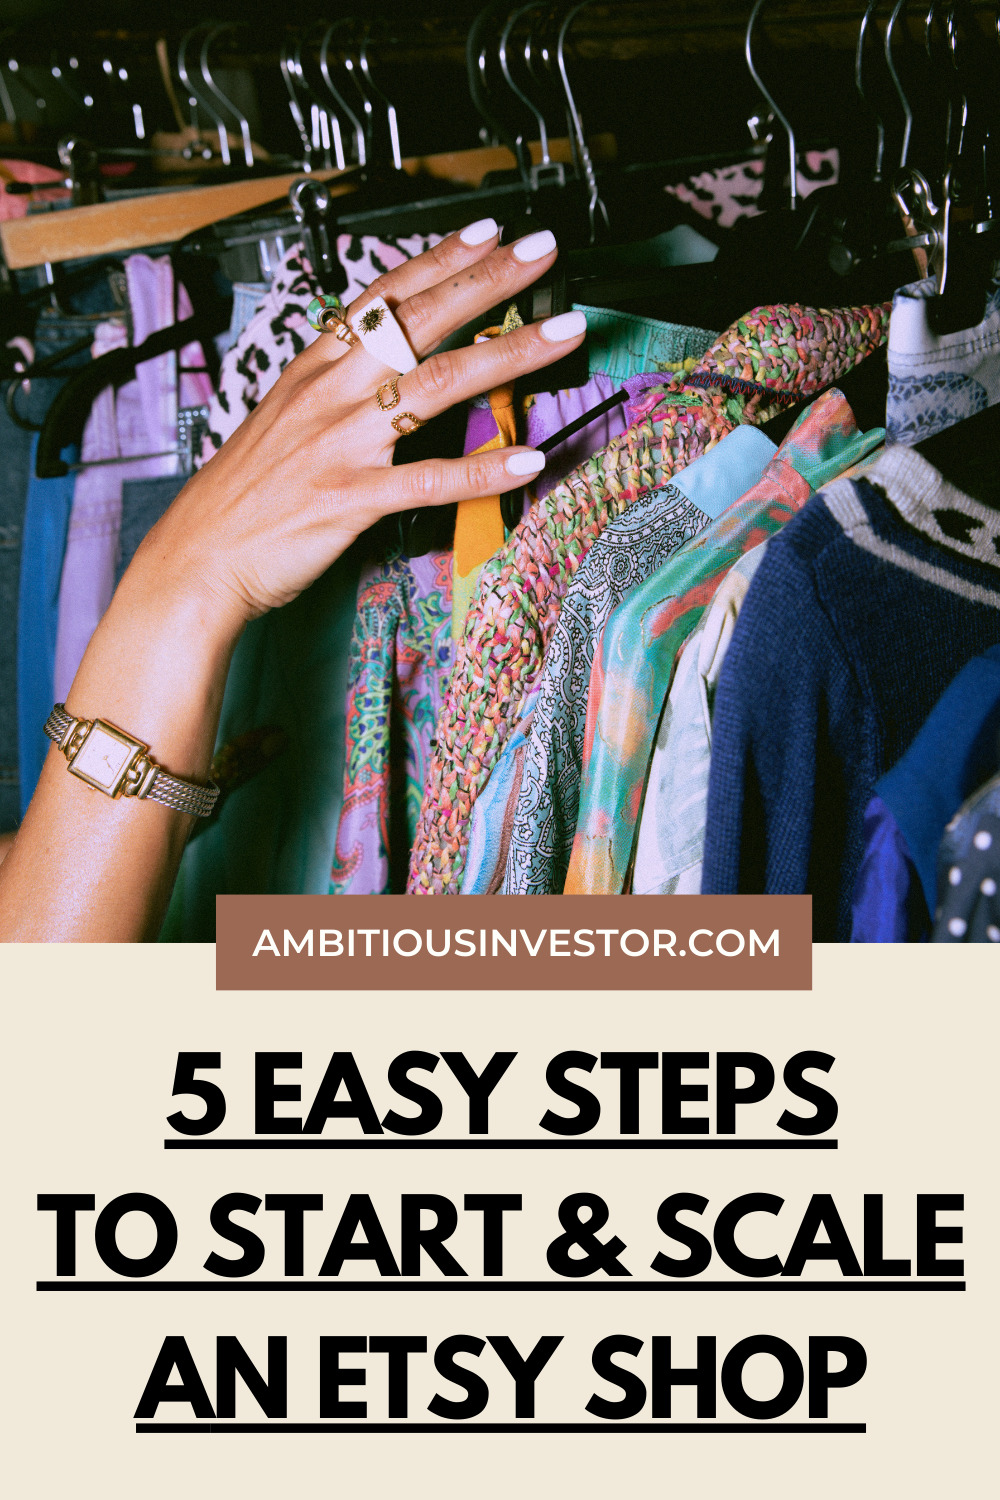 How to Start & Scale an Etsy Shop in 5 Easy Steps